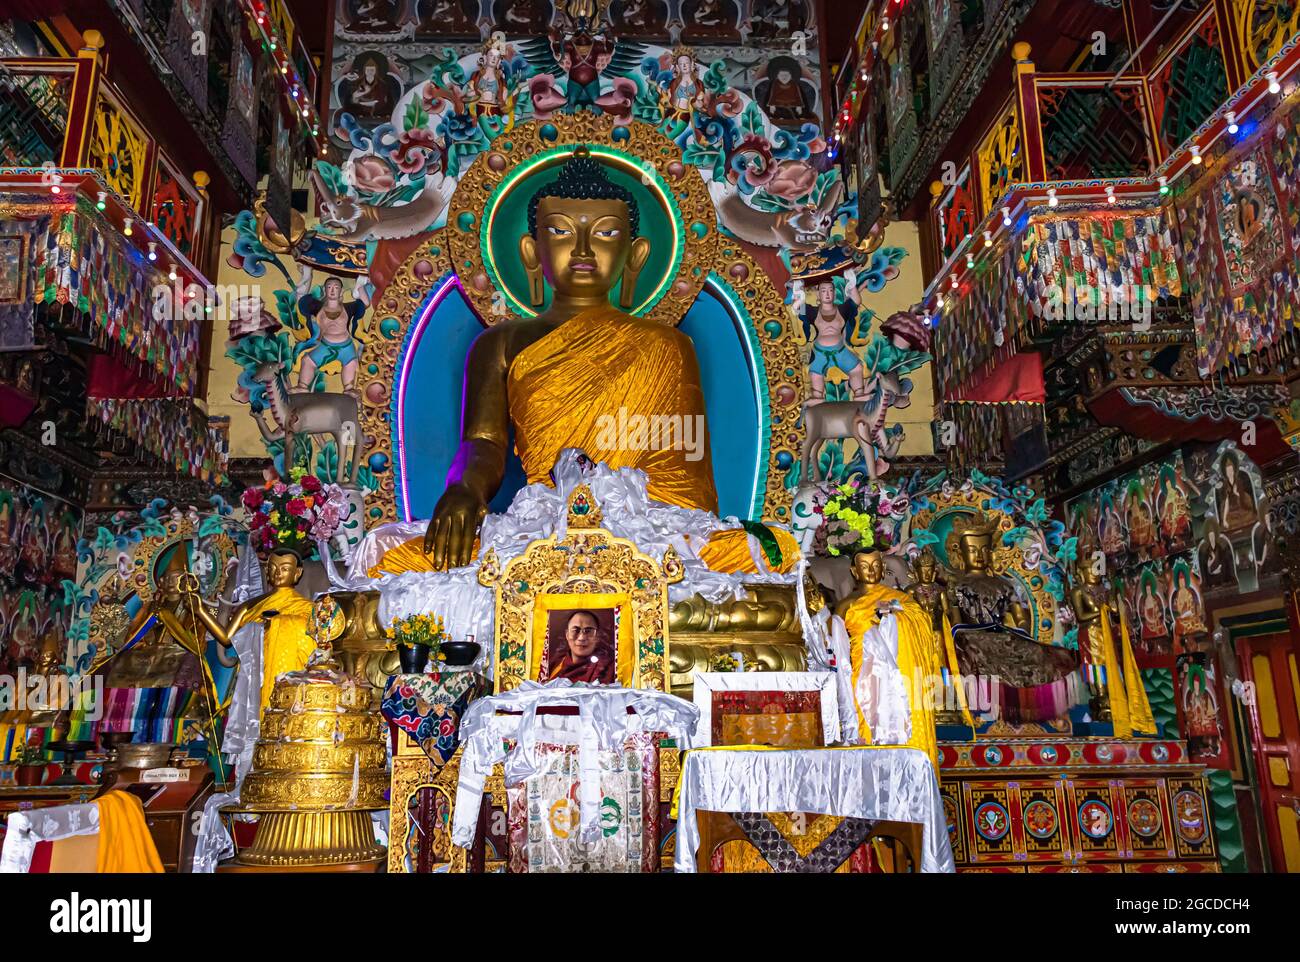 huge buddha golden statue decorated with religious flags and offerings at evening image is taken at tawang monastery arunachal pradesh india. Stock Photo